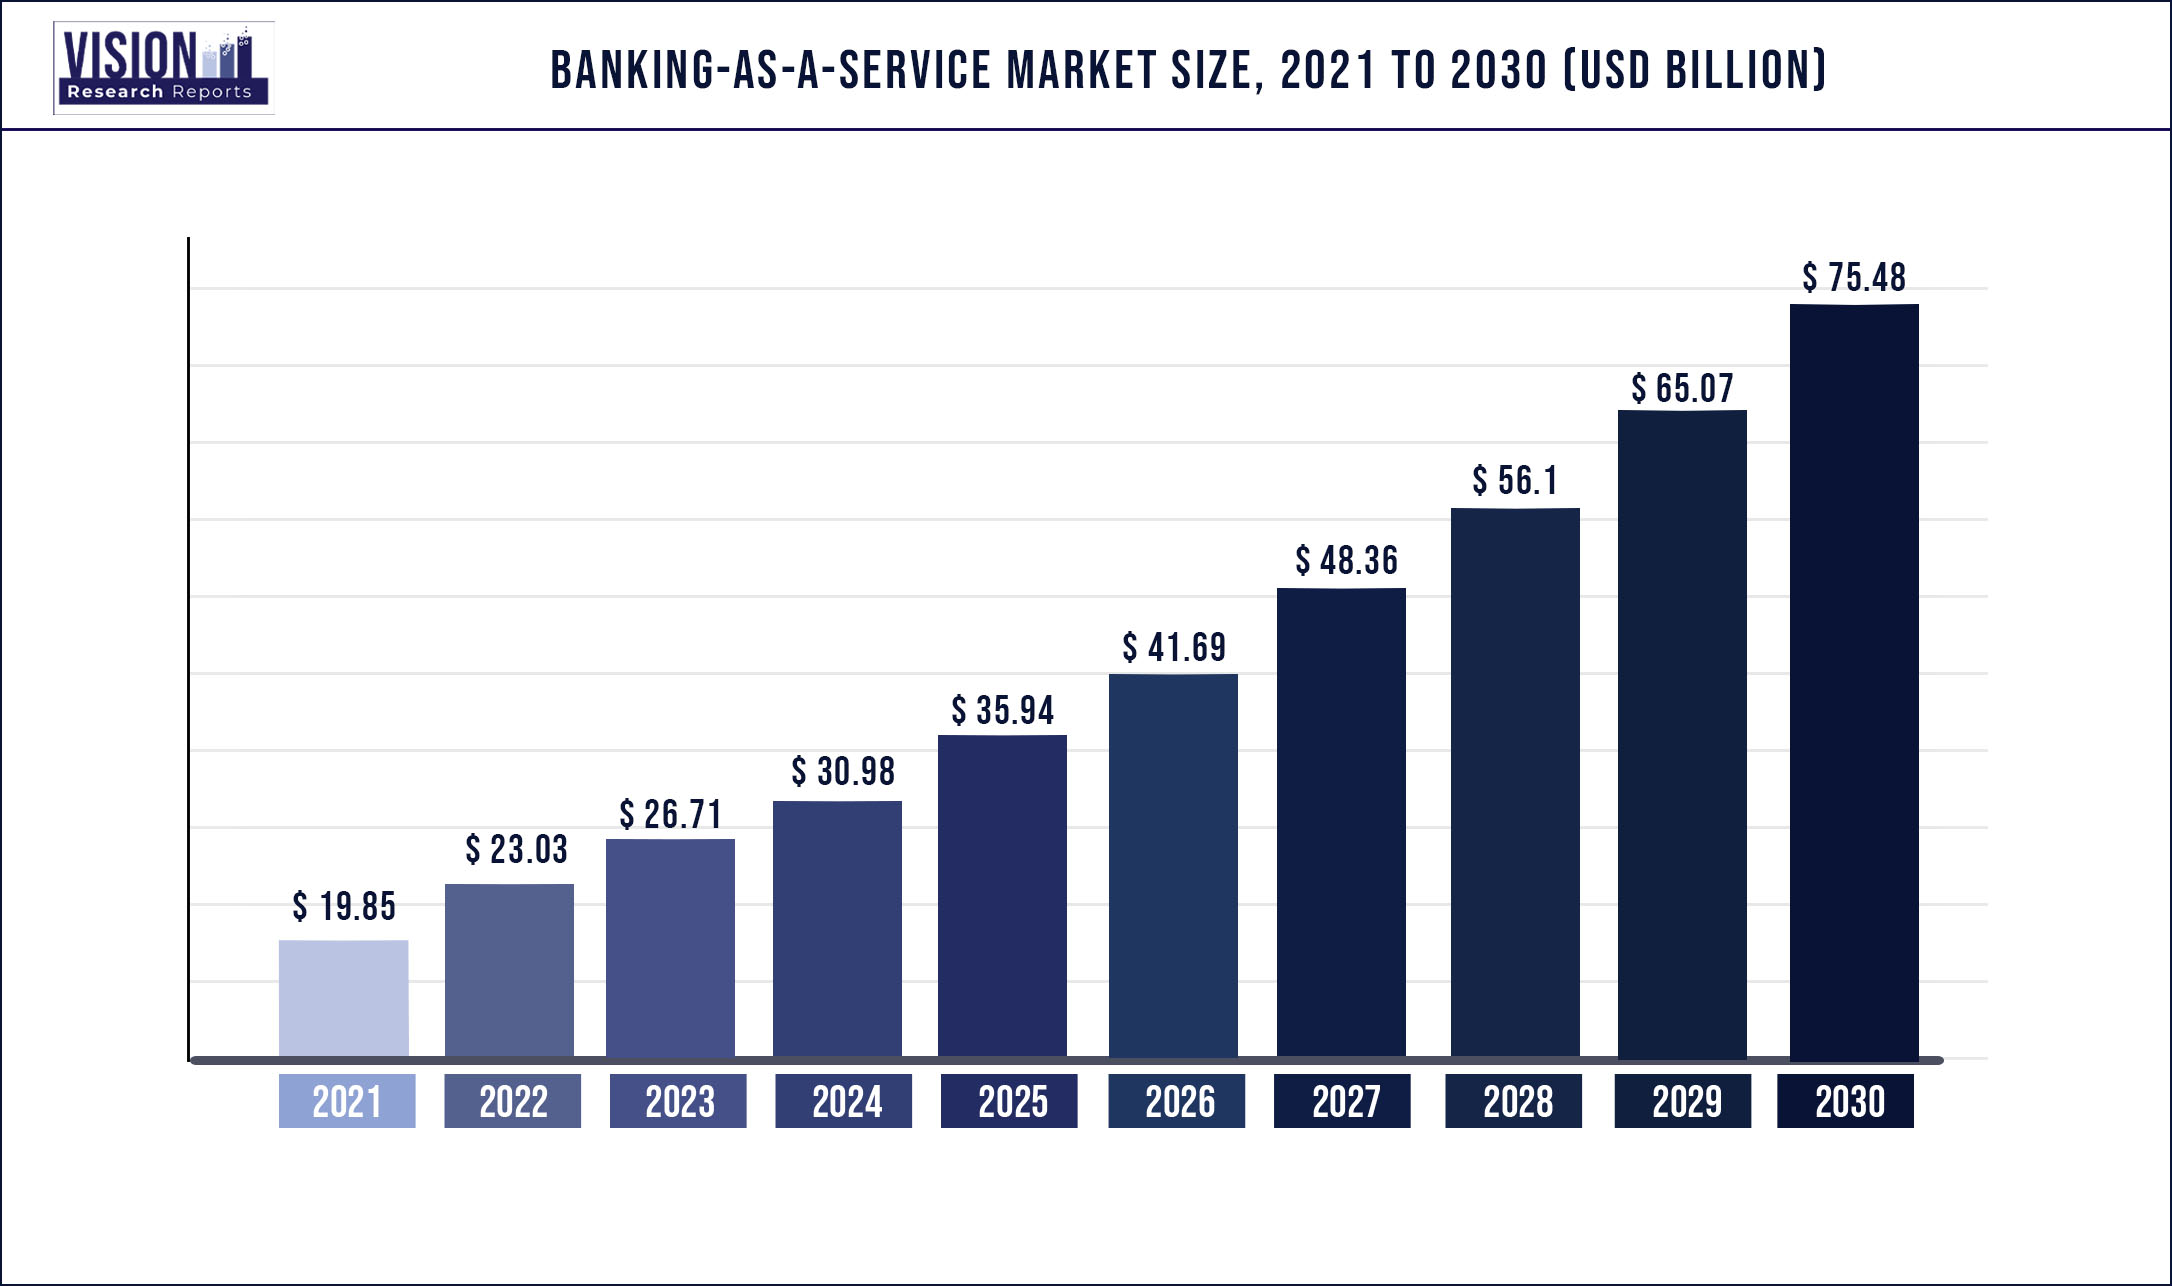 Banking-as-a-Service Market Size 2021 to 2030